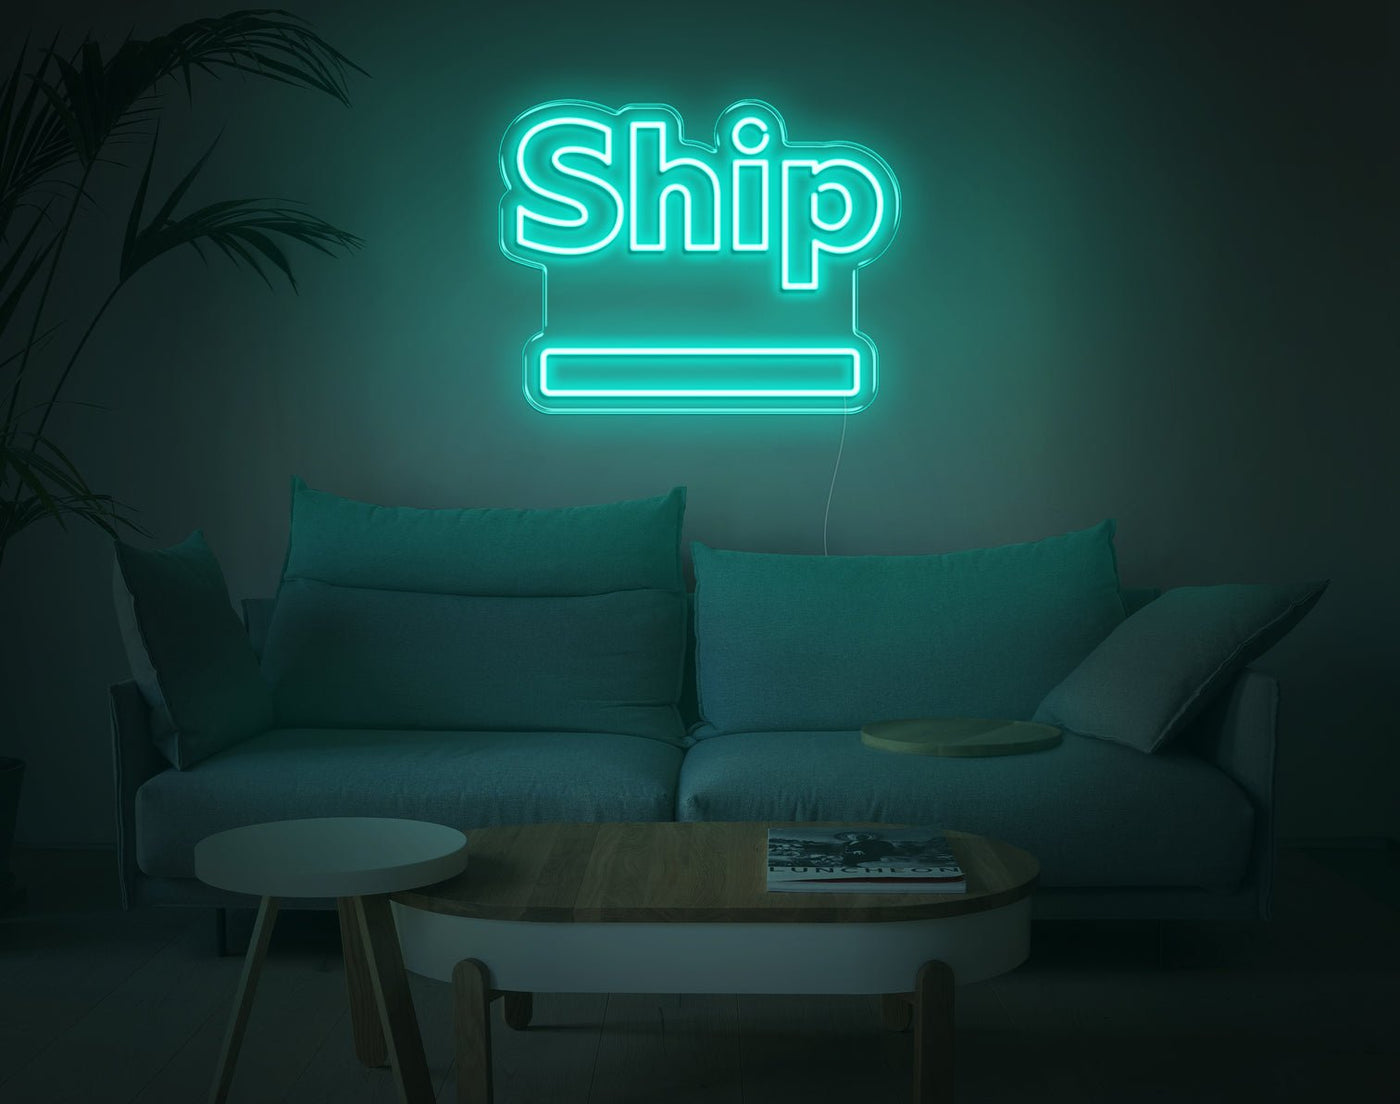 Ship LED Neon Sign - 15inch x 19inchTurquoise